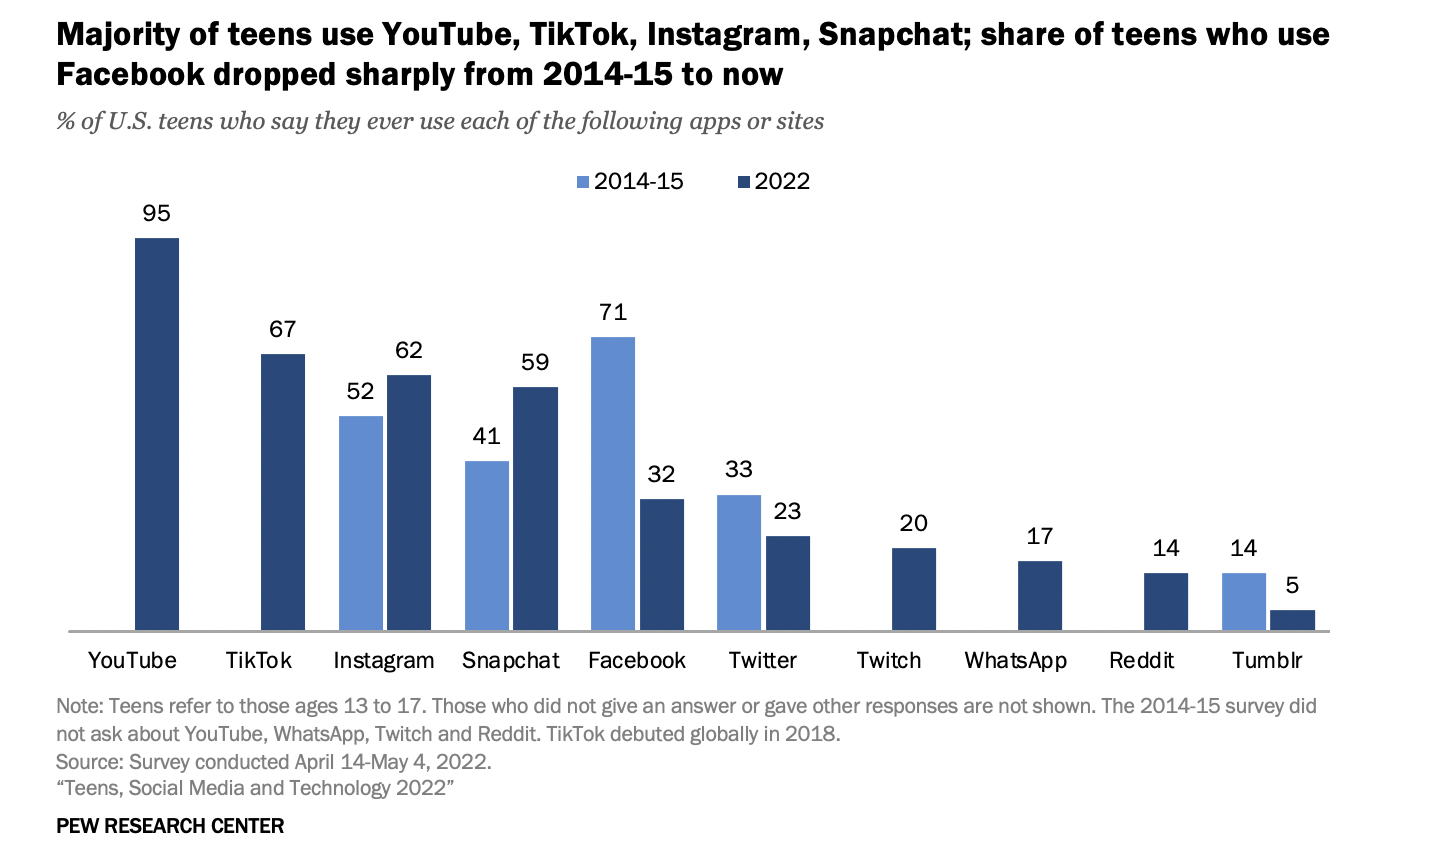 chart comparing how usage among teens has changed for different social media platforms between 2014-2015 and 2022